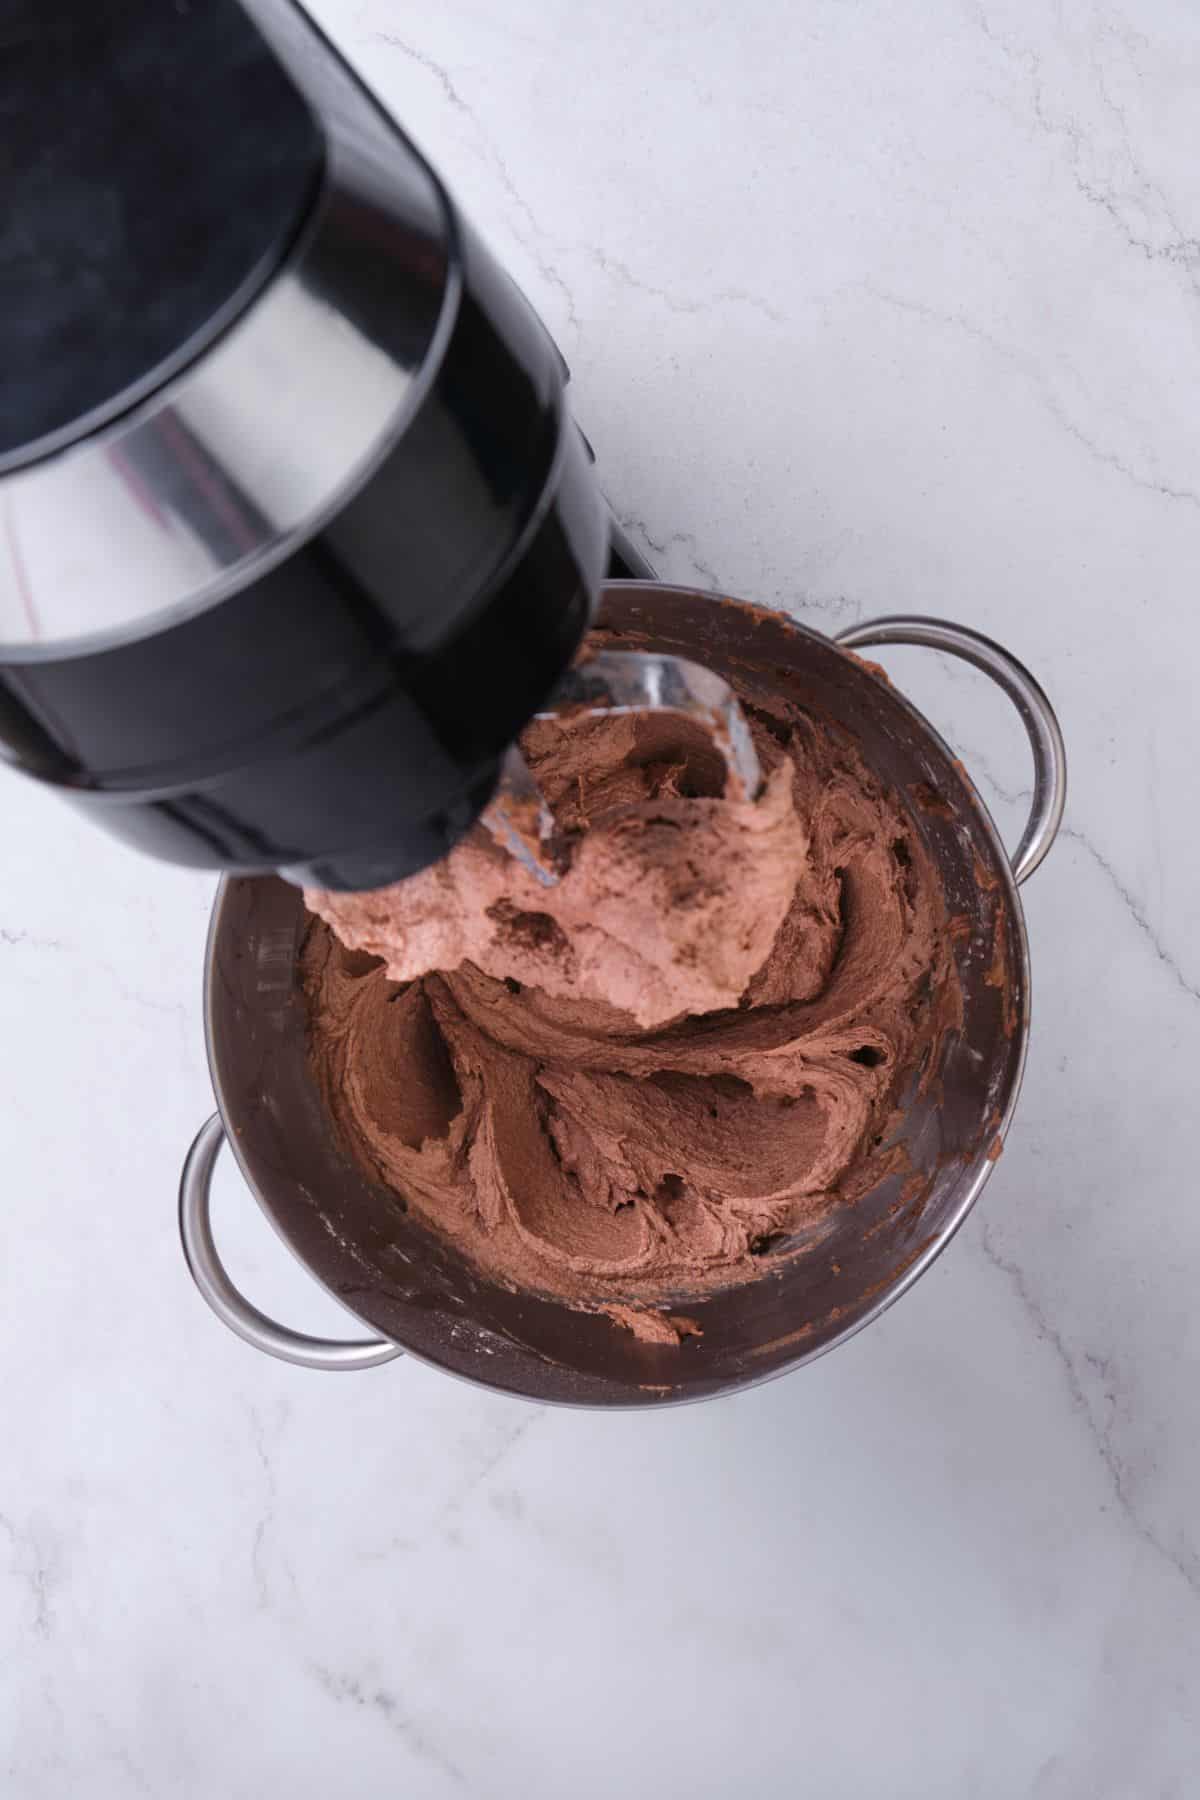 Chocolate buttercream in a stand mixer.